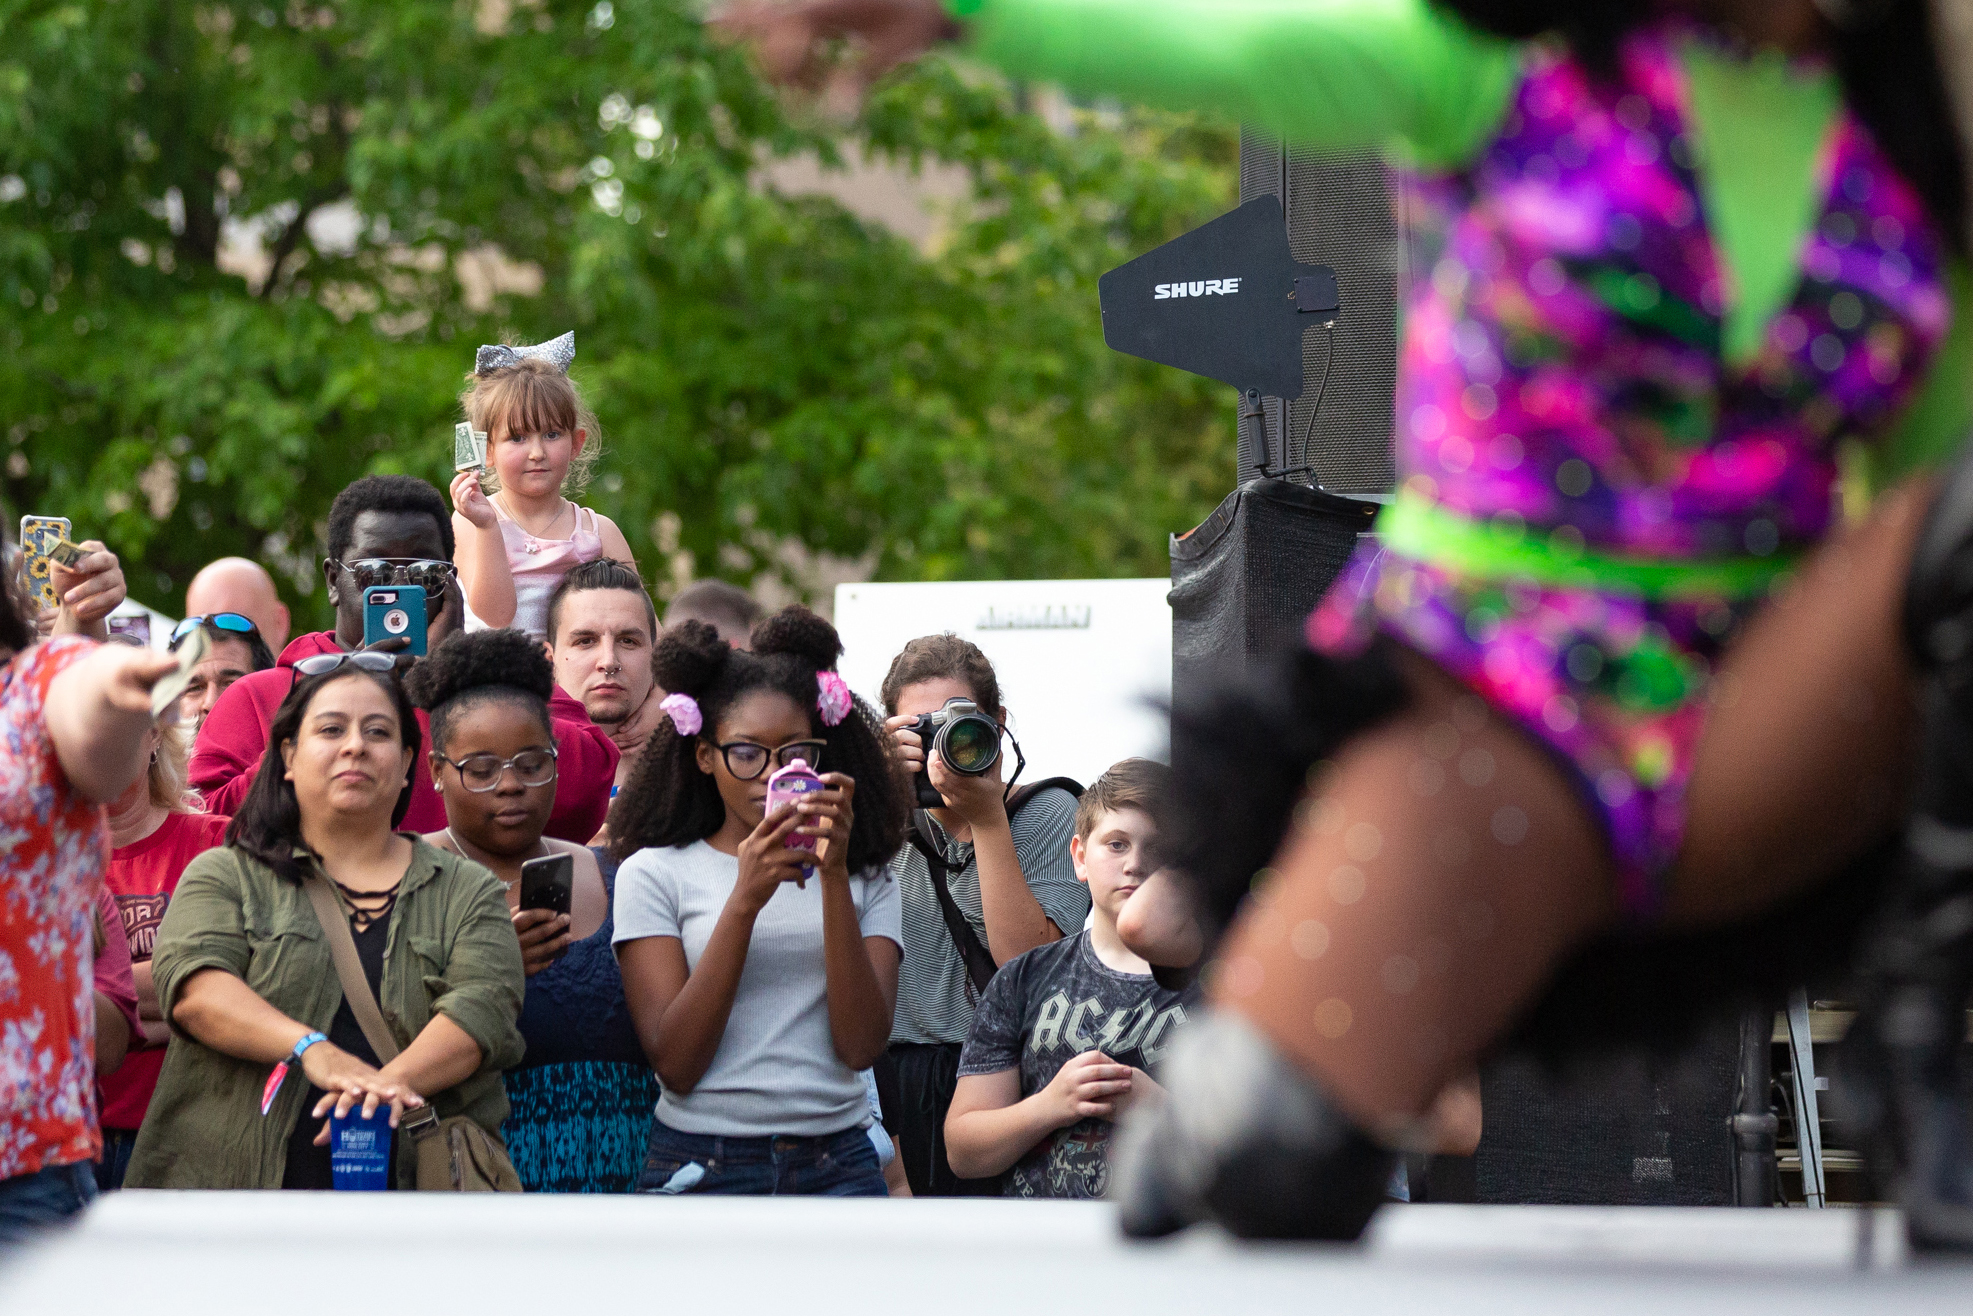  Festival goers watch a drag queen performance during the Downtown Block Party in Iowa City on Saturday, June 22, 2019.  